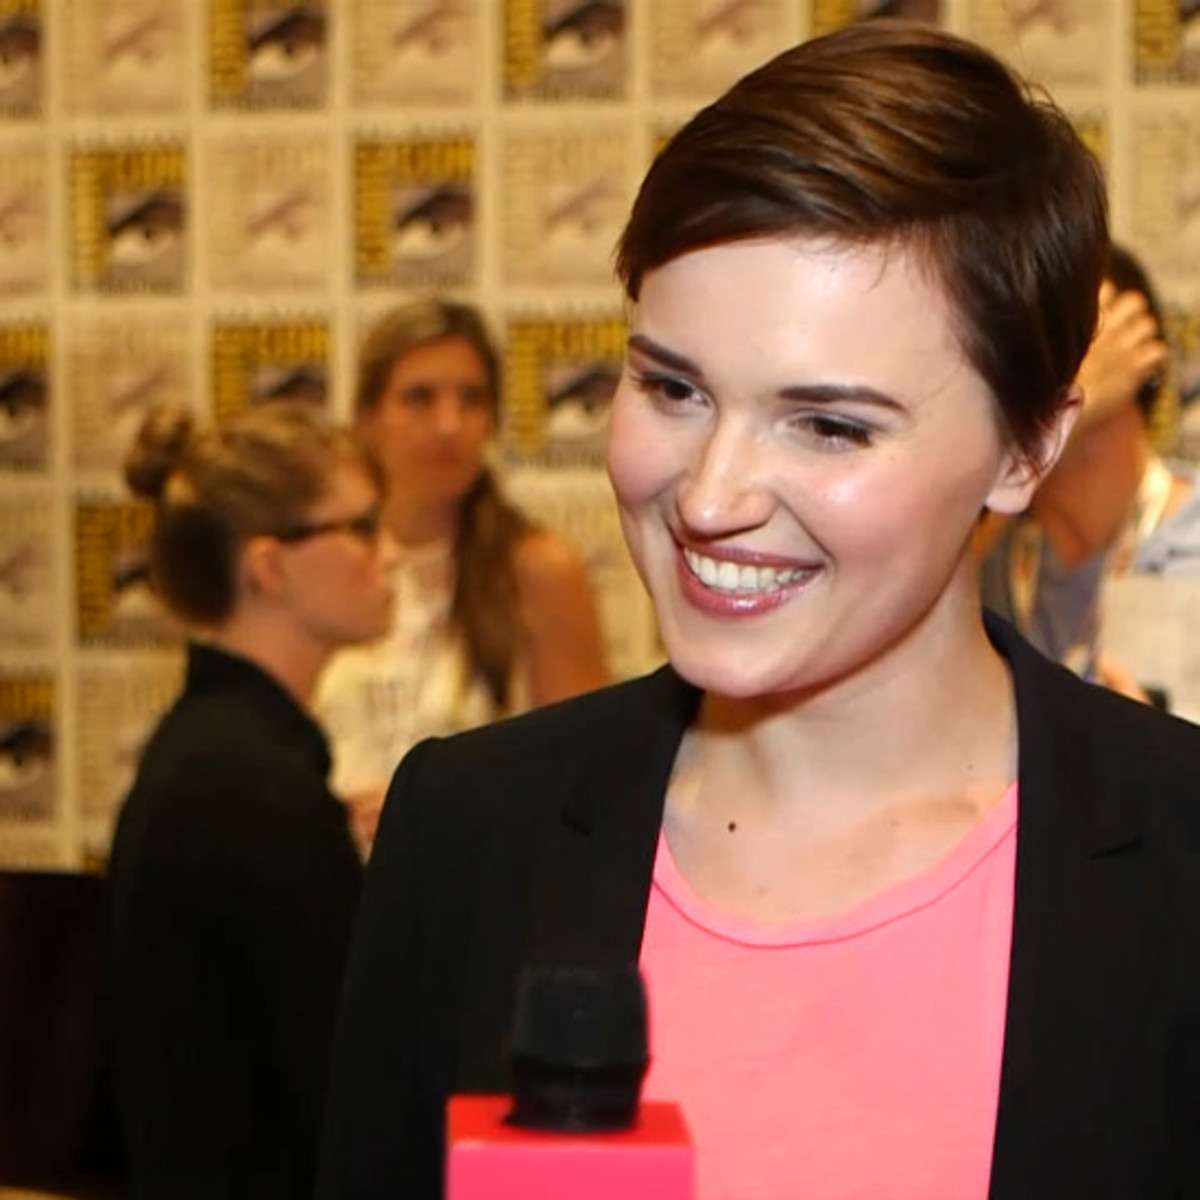 Biography of Author Veronica Roth